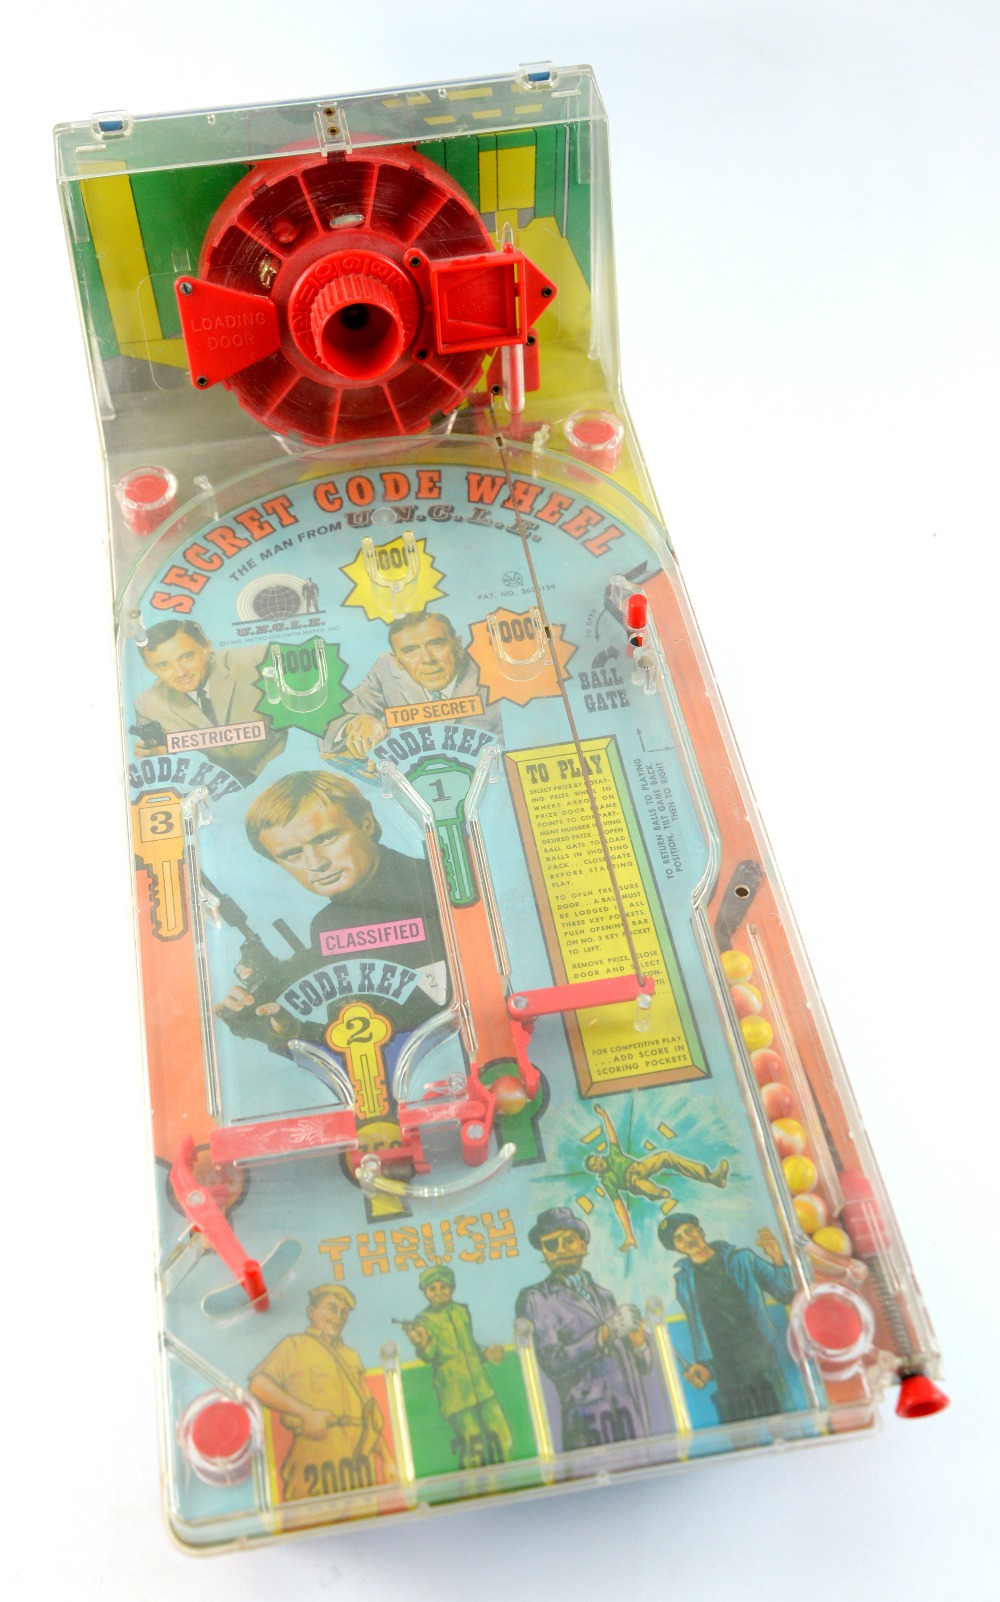 The Man From U.N.C.L.E. Secret Code Wheel Pinball Game by Sears, in original box.. - Image 2 of 2